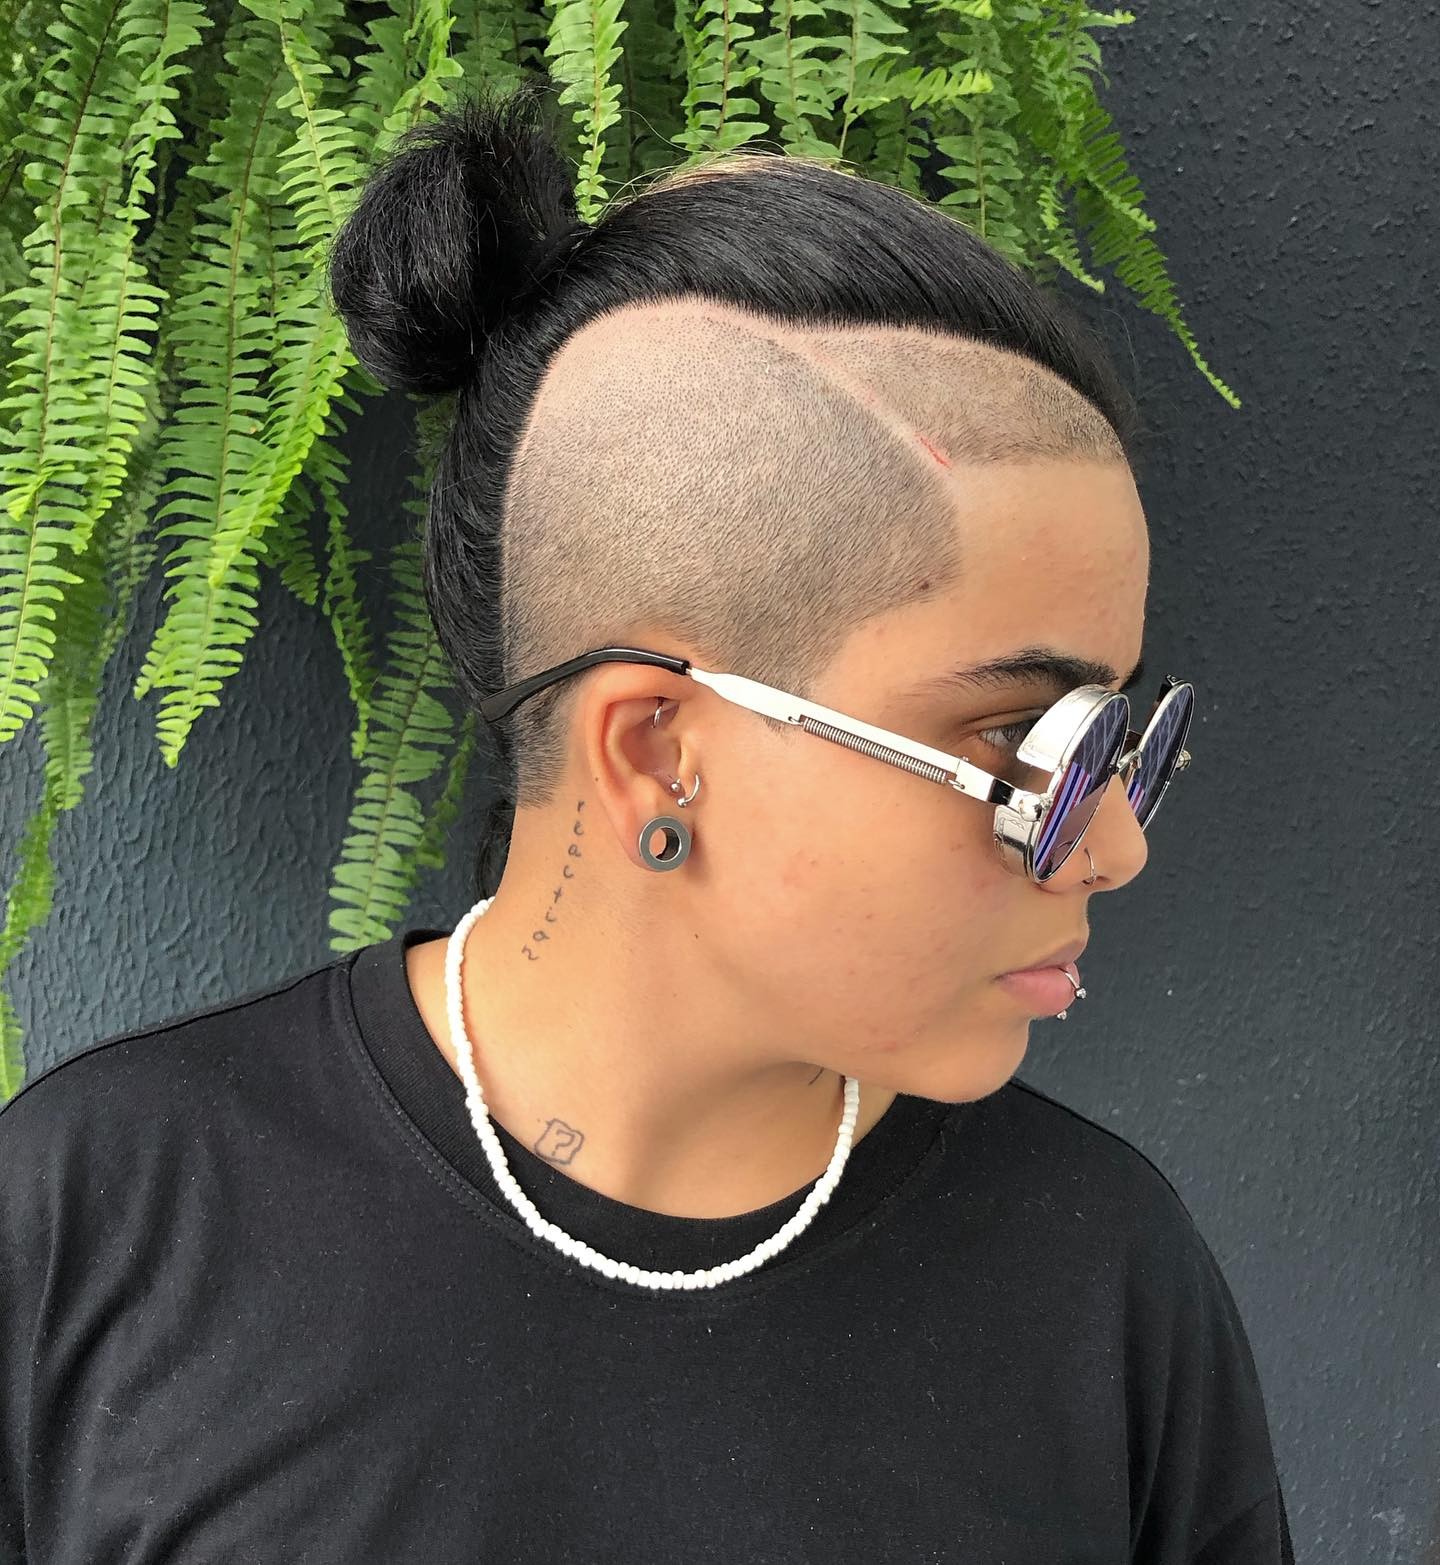 Hairstyles and Haircuts. Barbarian style. - Messy Undercut Haircut with  Skin Fade for Boys #barbarianstyle #undercut #undercutmen #undercutdesign  #undercuthairstyle #undercutnation #undercuts #undercutsformen #hairstyle # haircut Find More Impressive ...